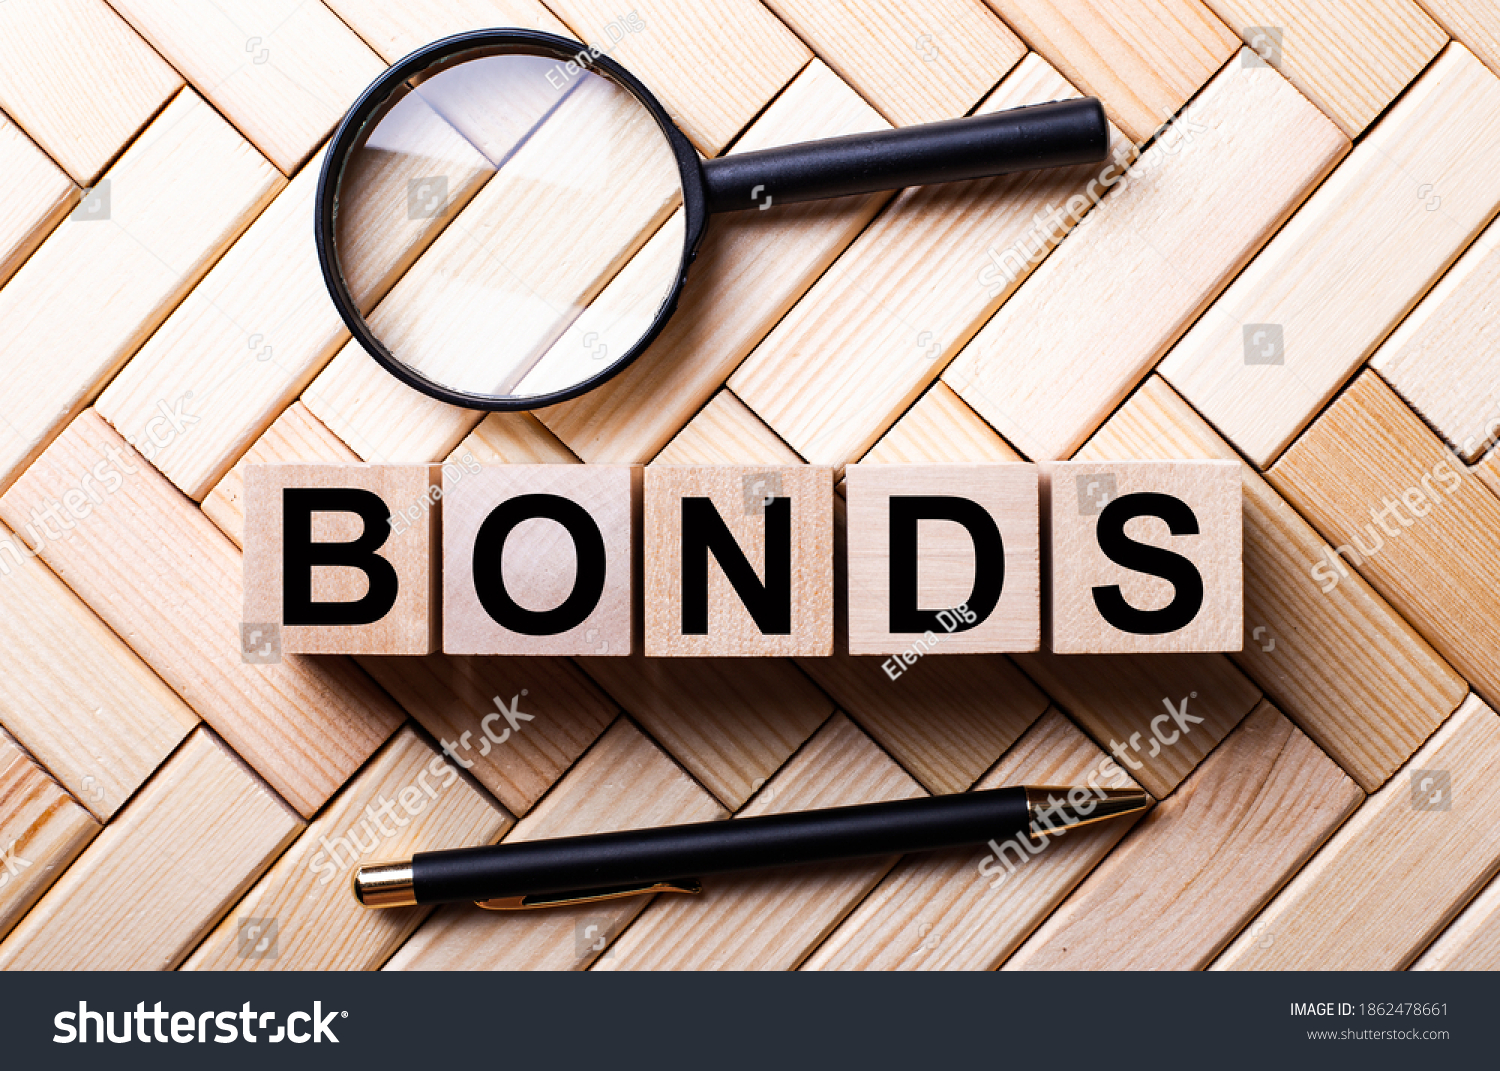 stock-photo-wooden-cubes-with-the-word-bonds-stand-on-a-wooden-background-between-a-magnifying-glass-and-a-1862478661